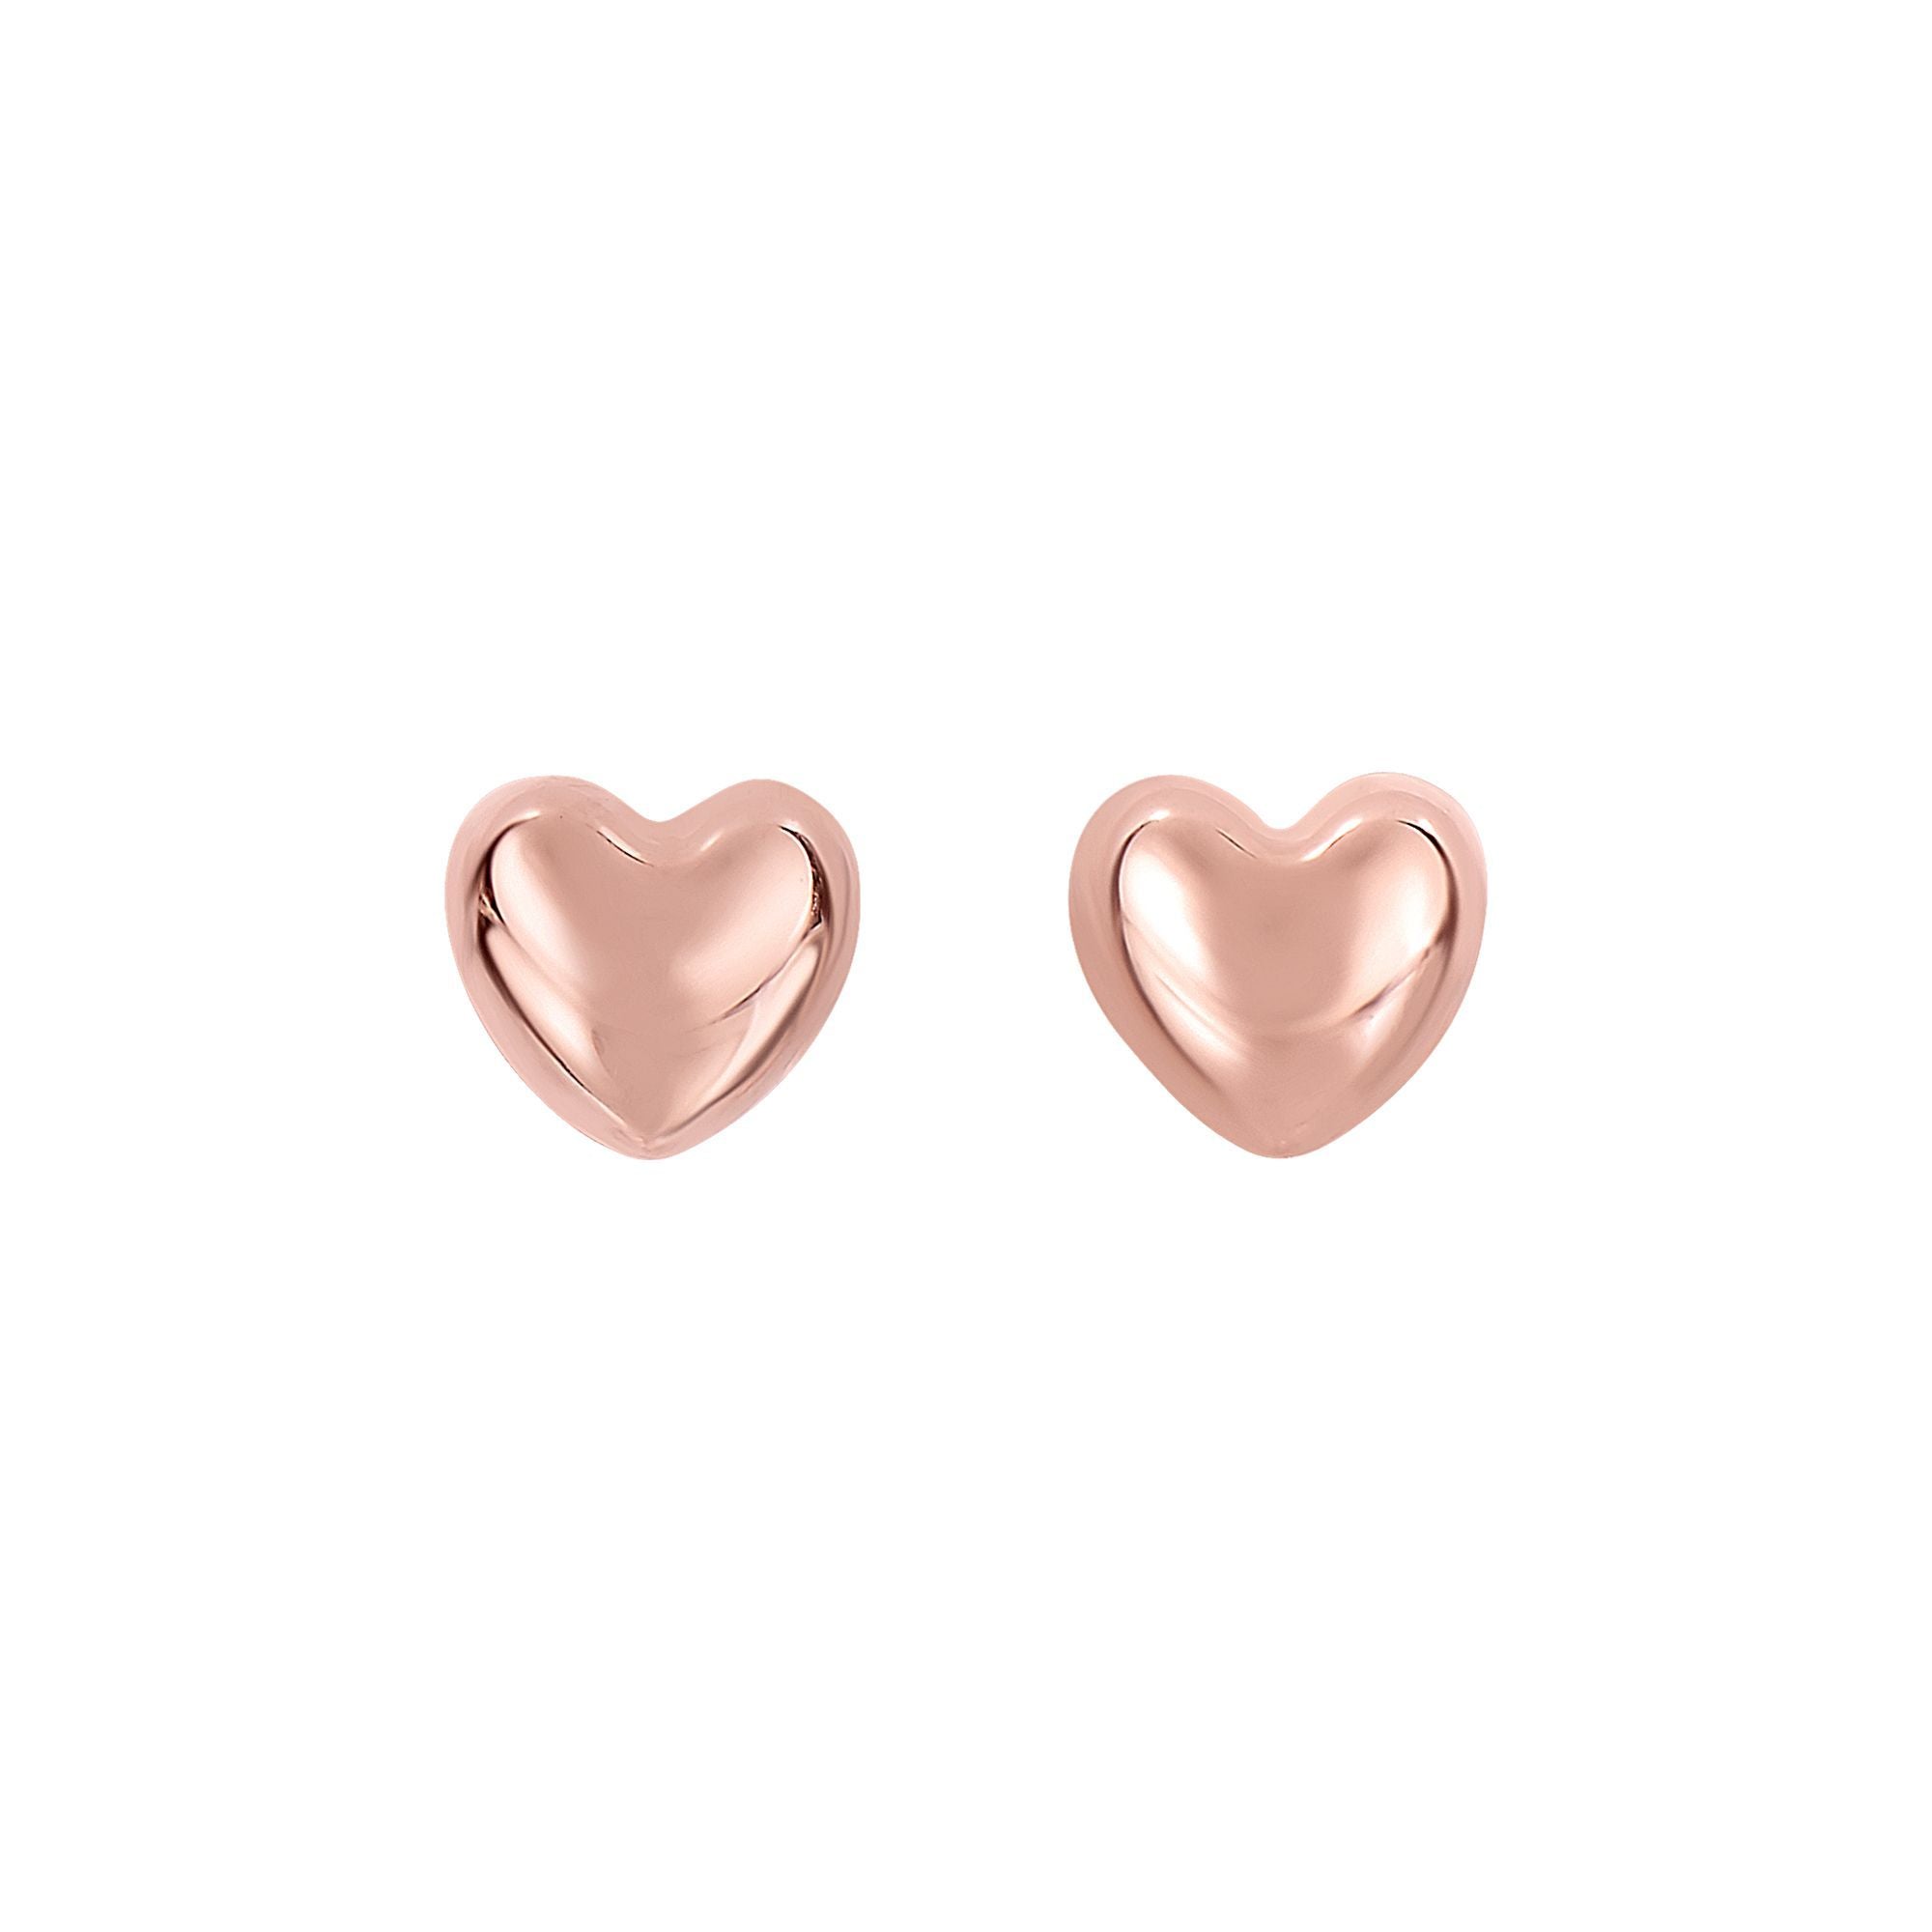 Minimalist Solid Gold Shiny Heart Fancy Post Earrings with Push Back Clasp - wingroupjewelry